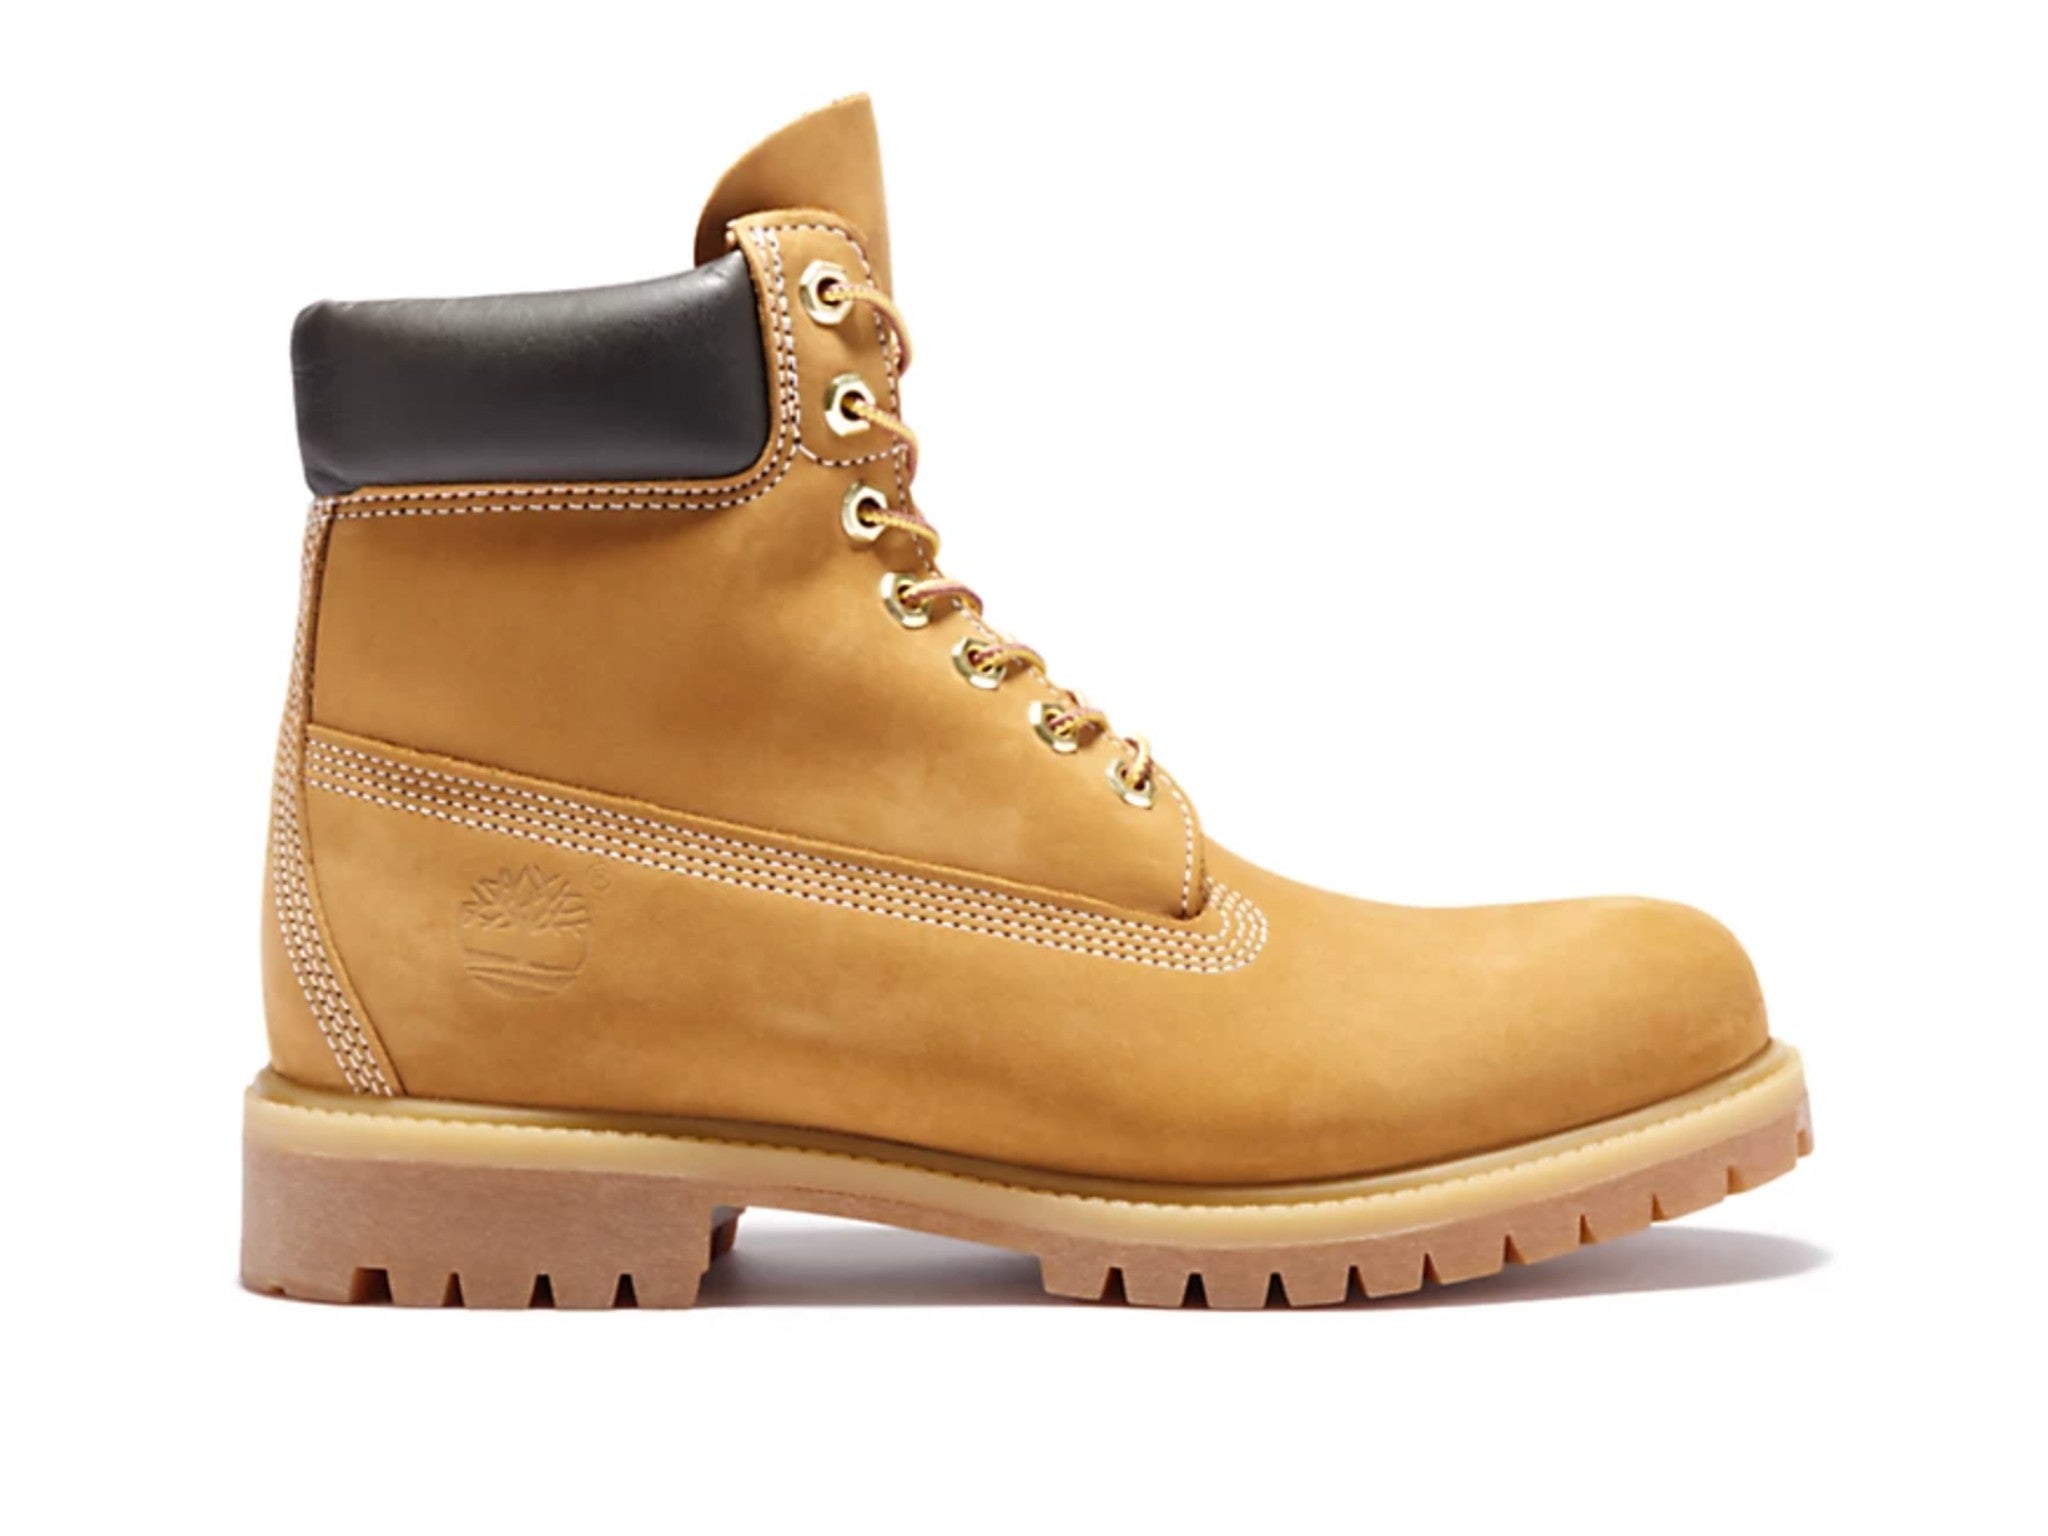 Timberland classic 6in boot indybest.jpeg